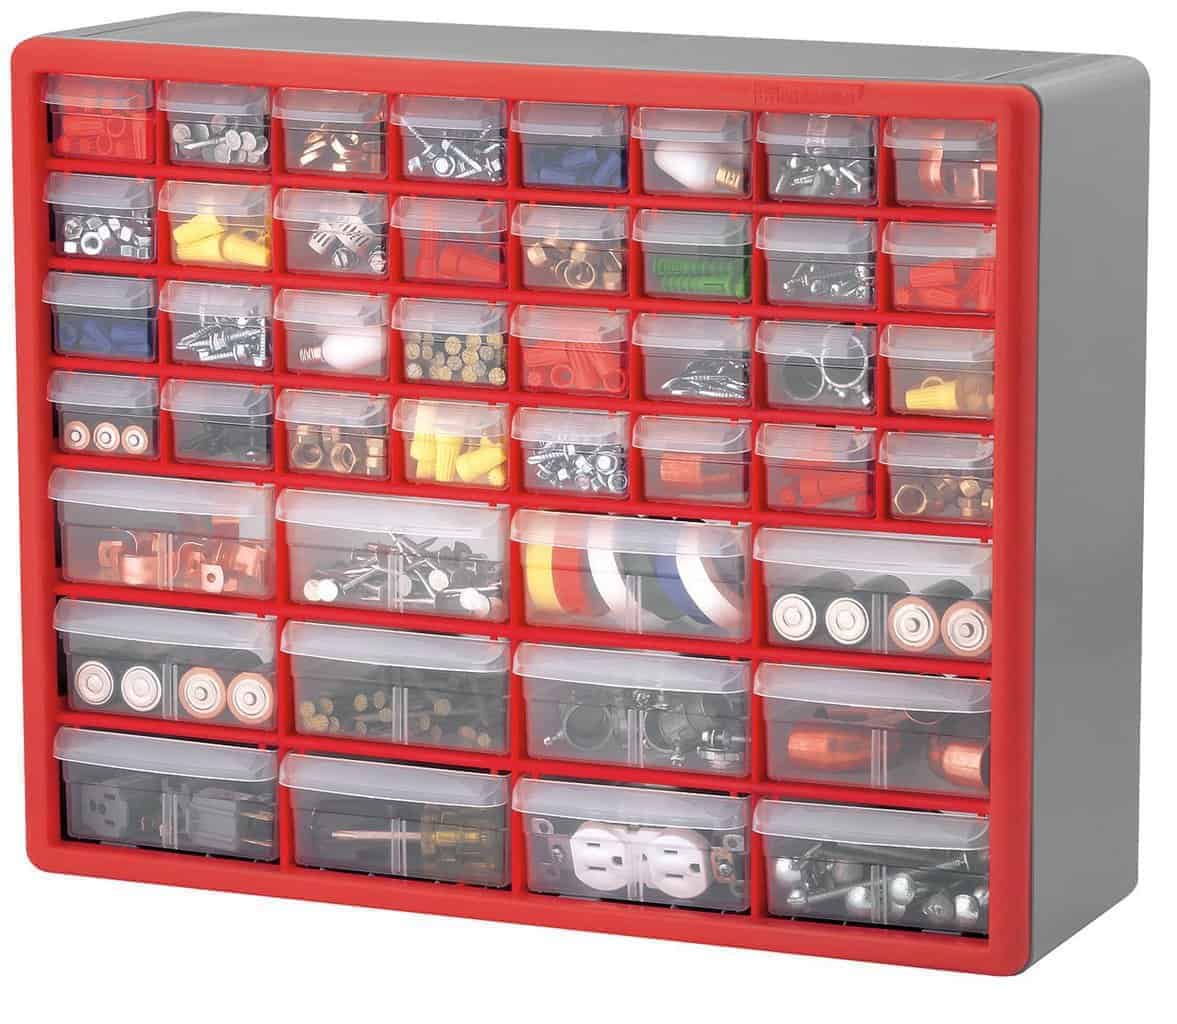 Lego Storage Cupboard Box Container w/ Door    11 random pick from lot in photos 